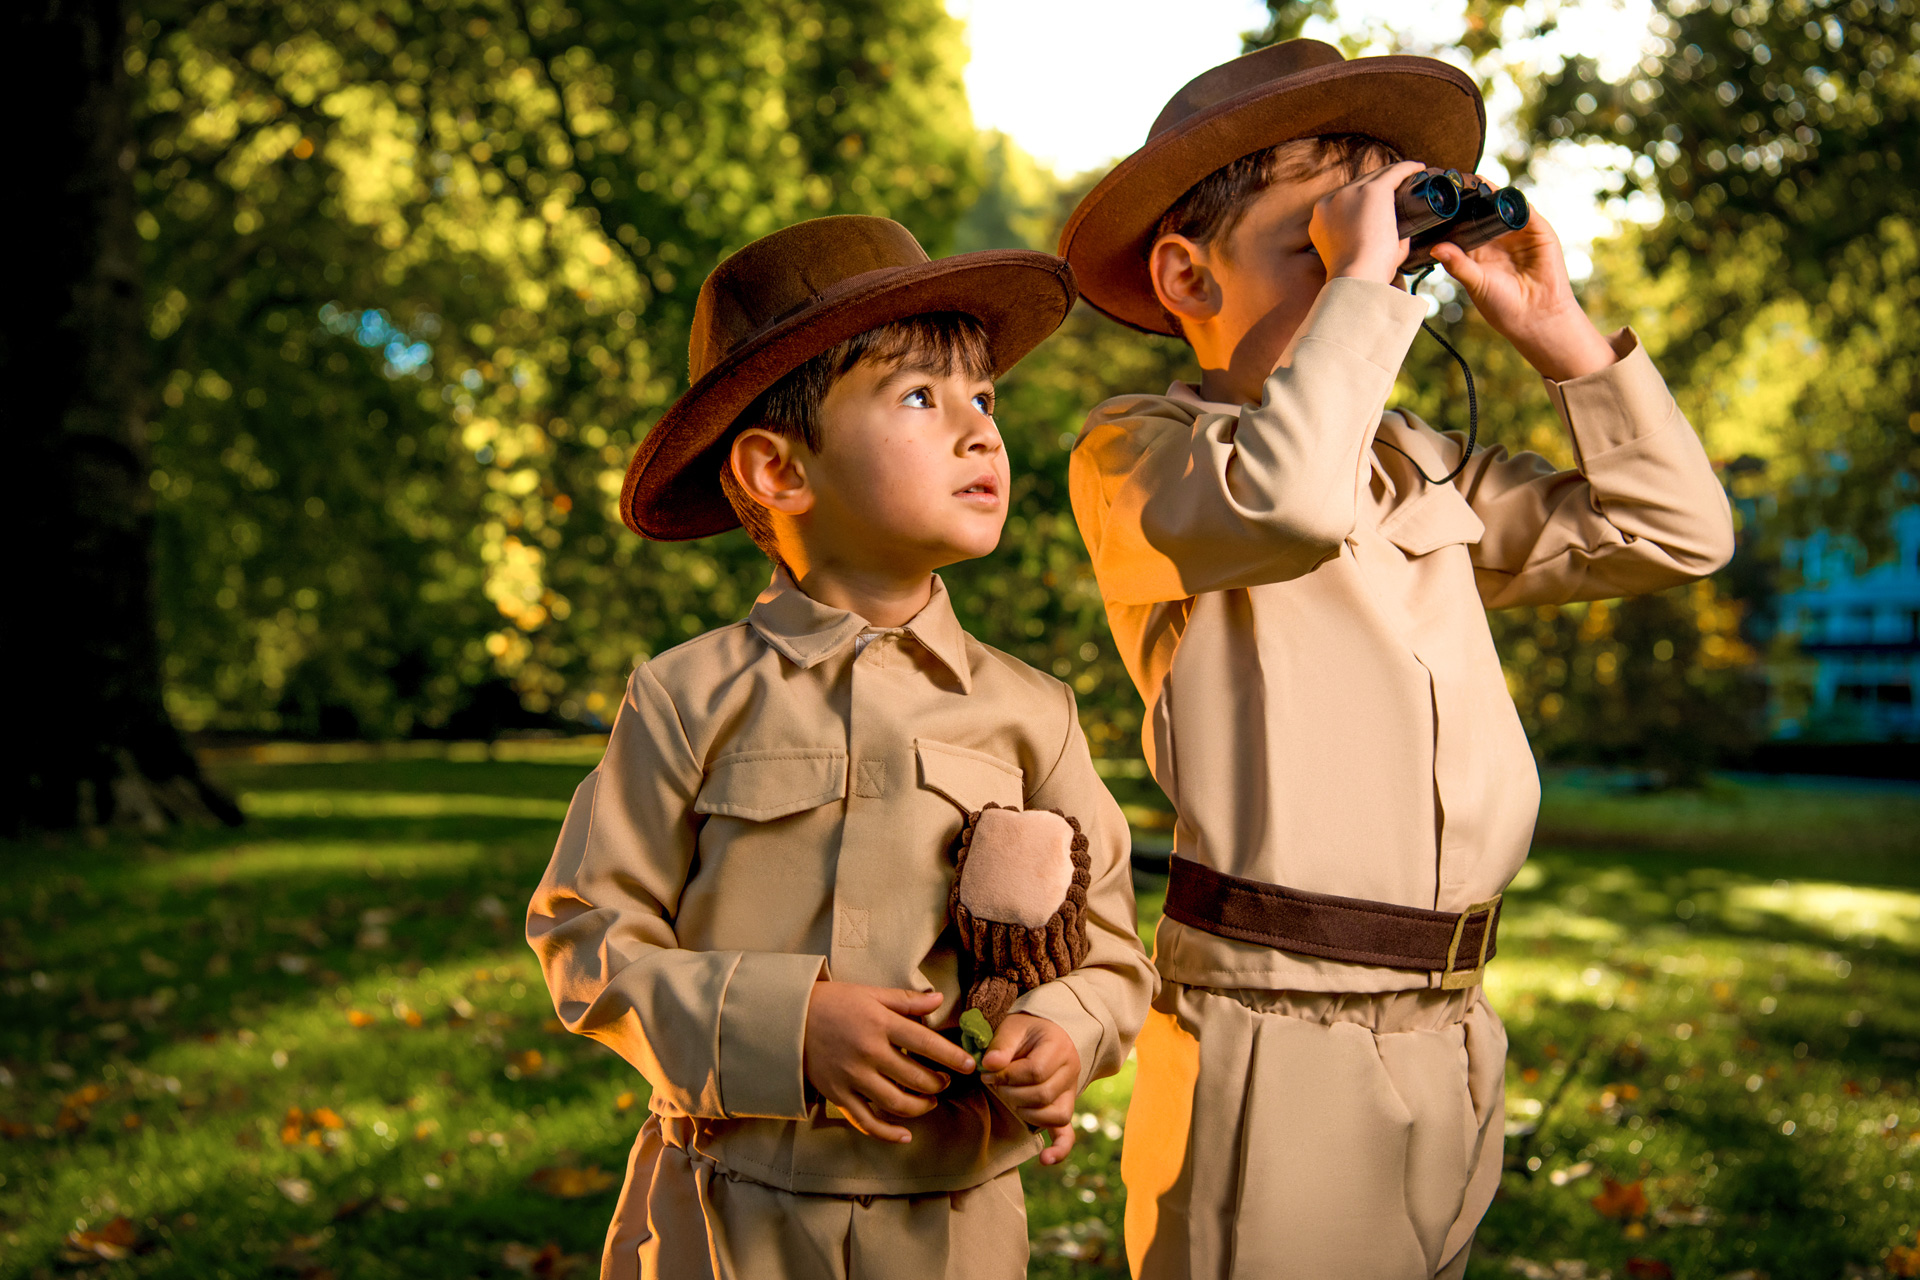 Two children dressed up as park rangers